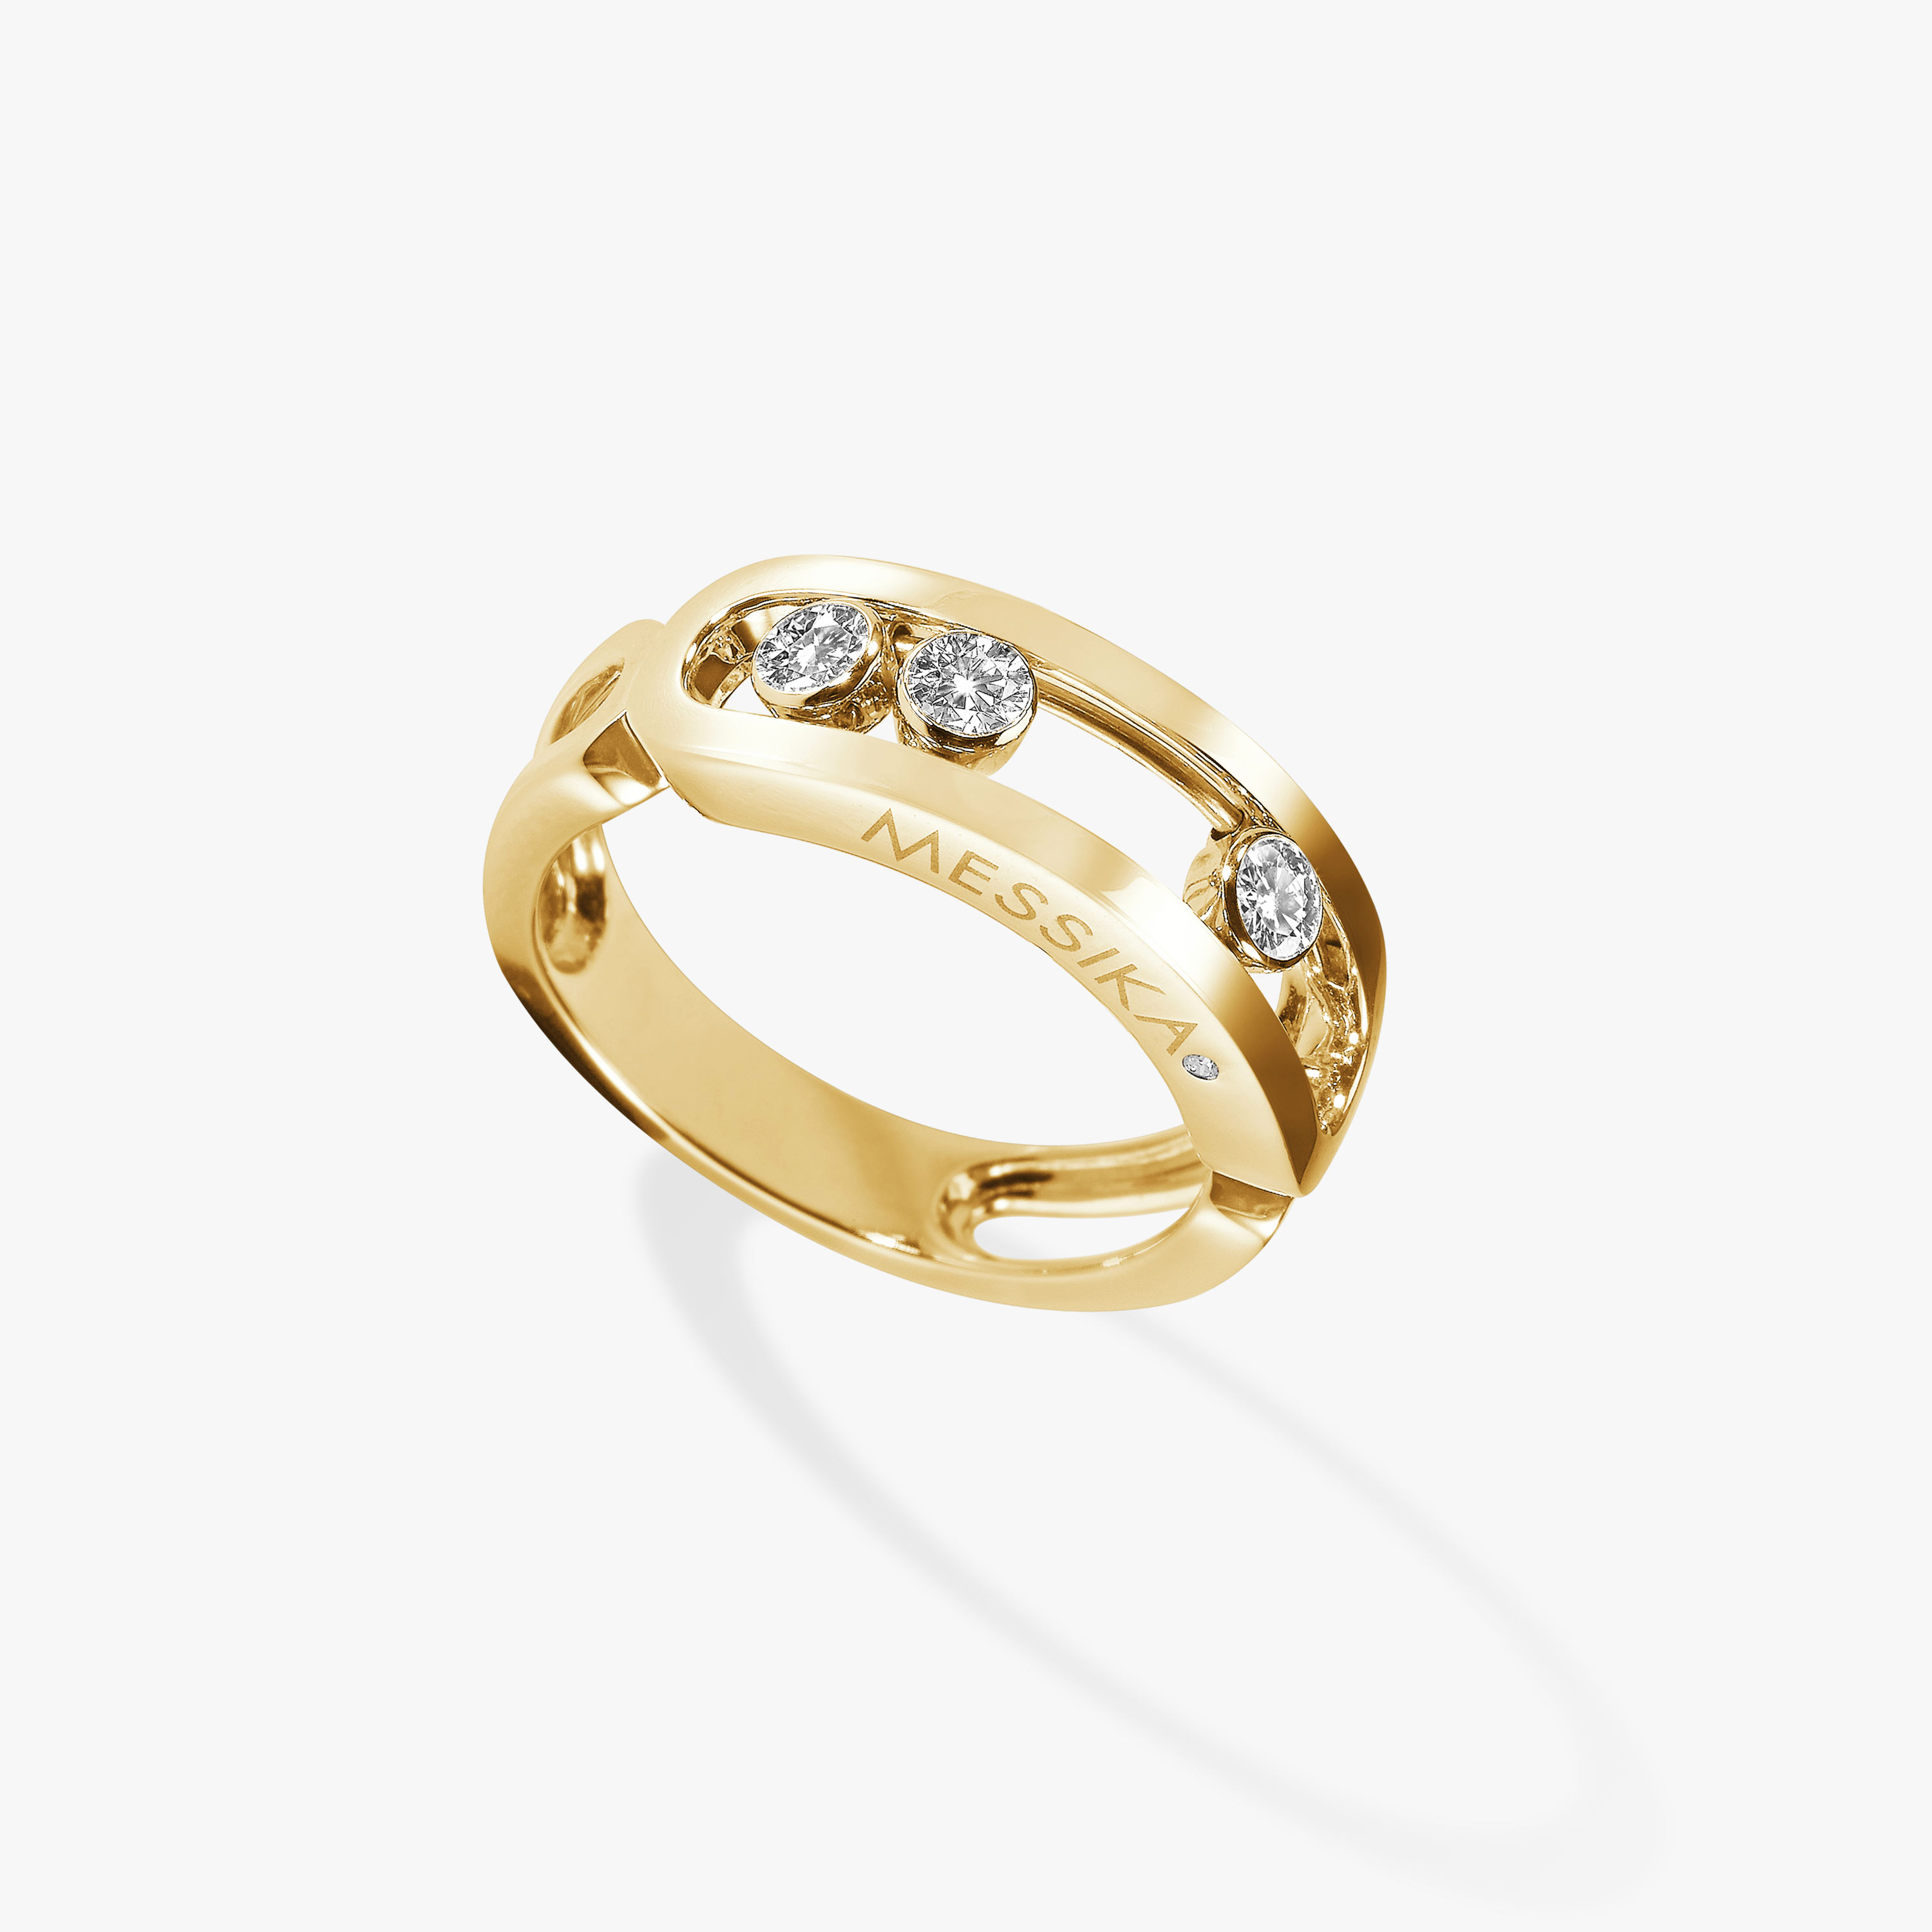 Move Classique Yellow Gold For Her Diamond Ring 03998-YG